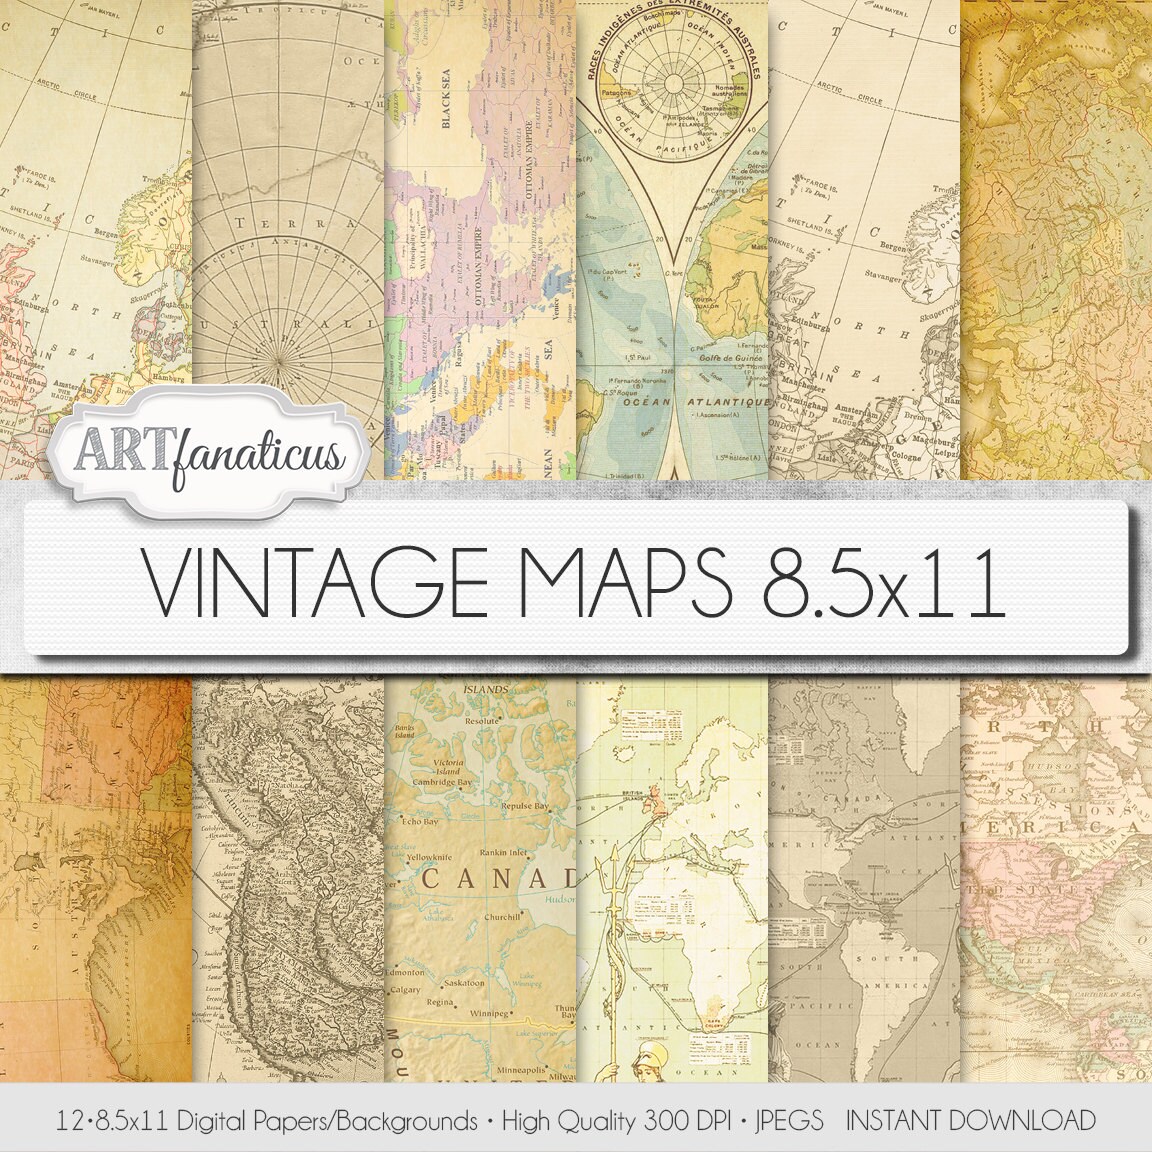 Vintage world map on an old stained parchment Wrapping Paper by